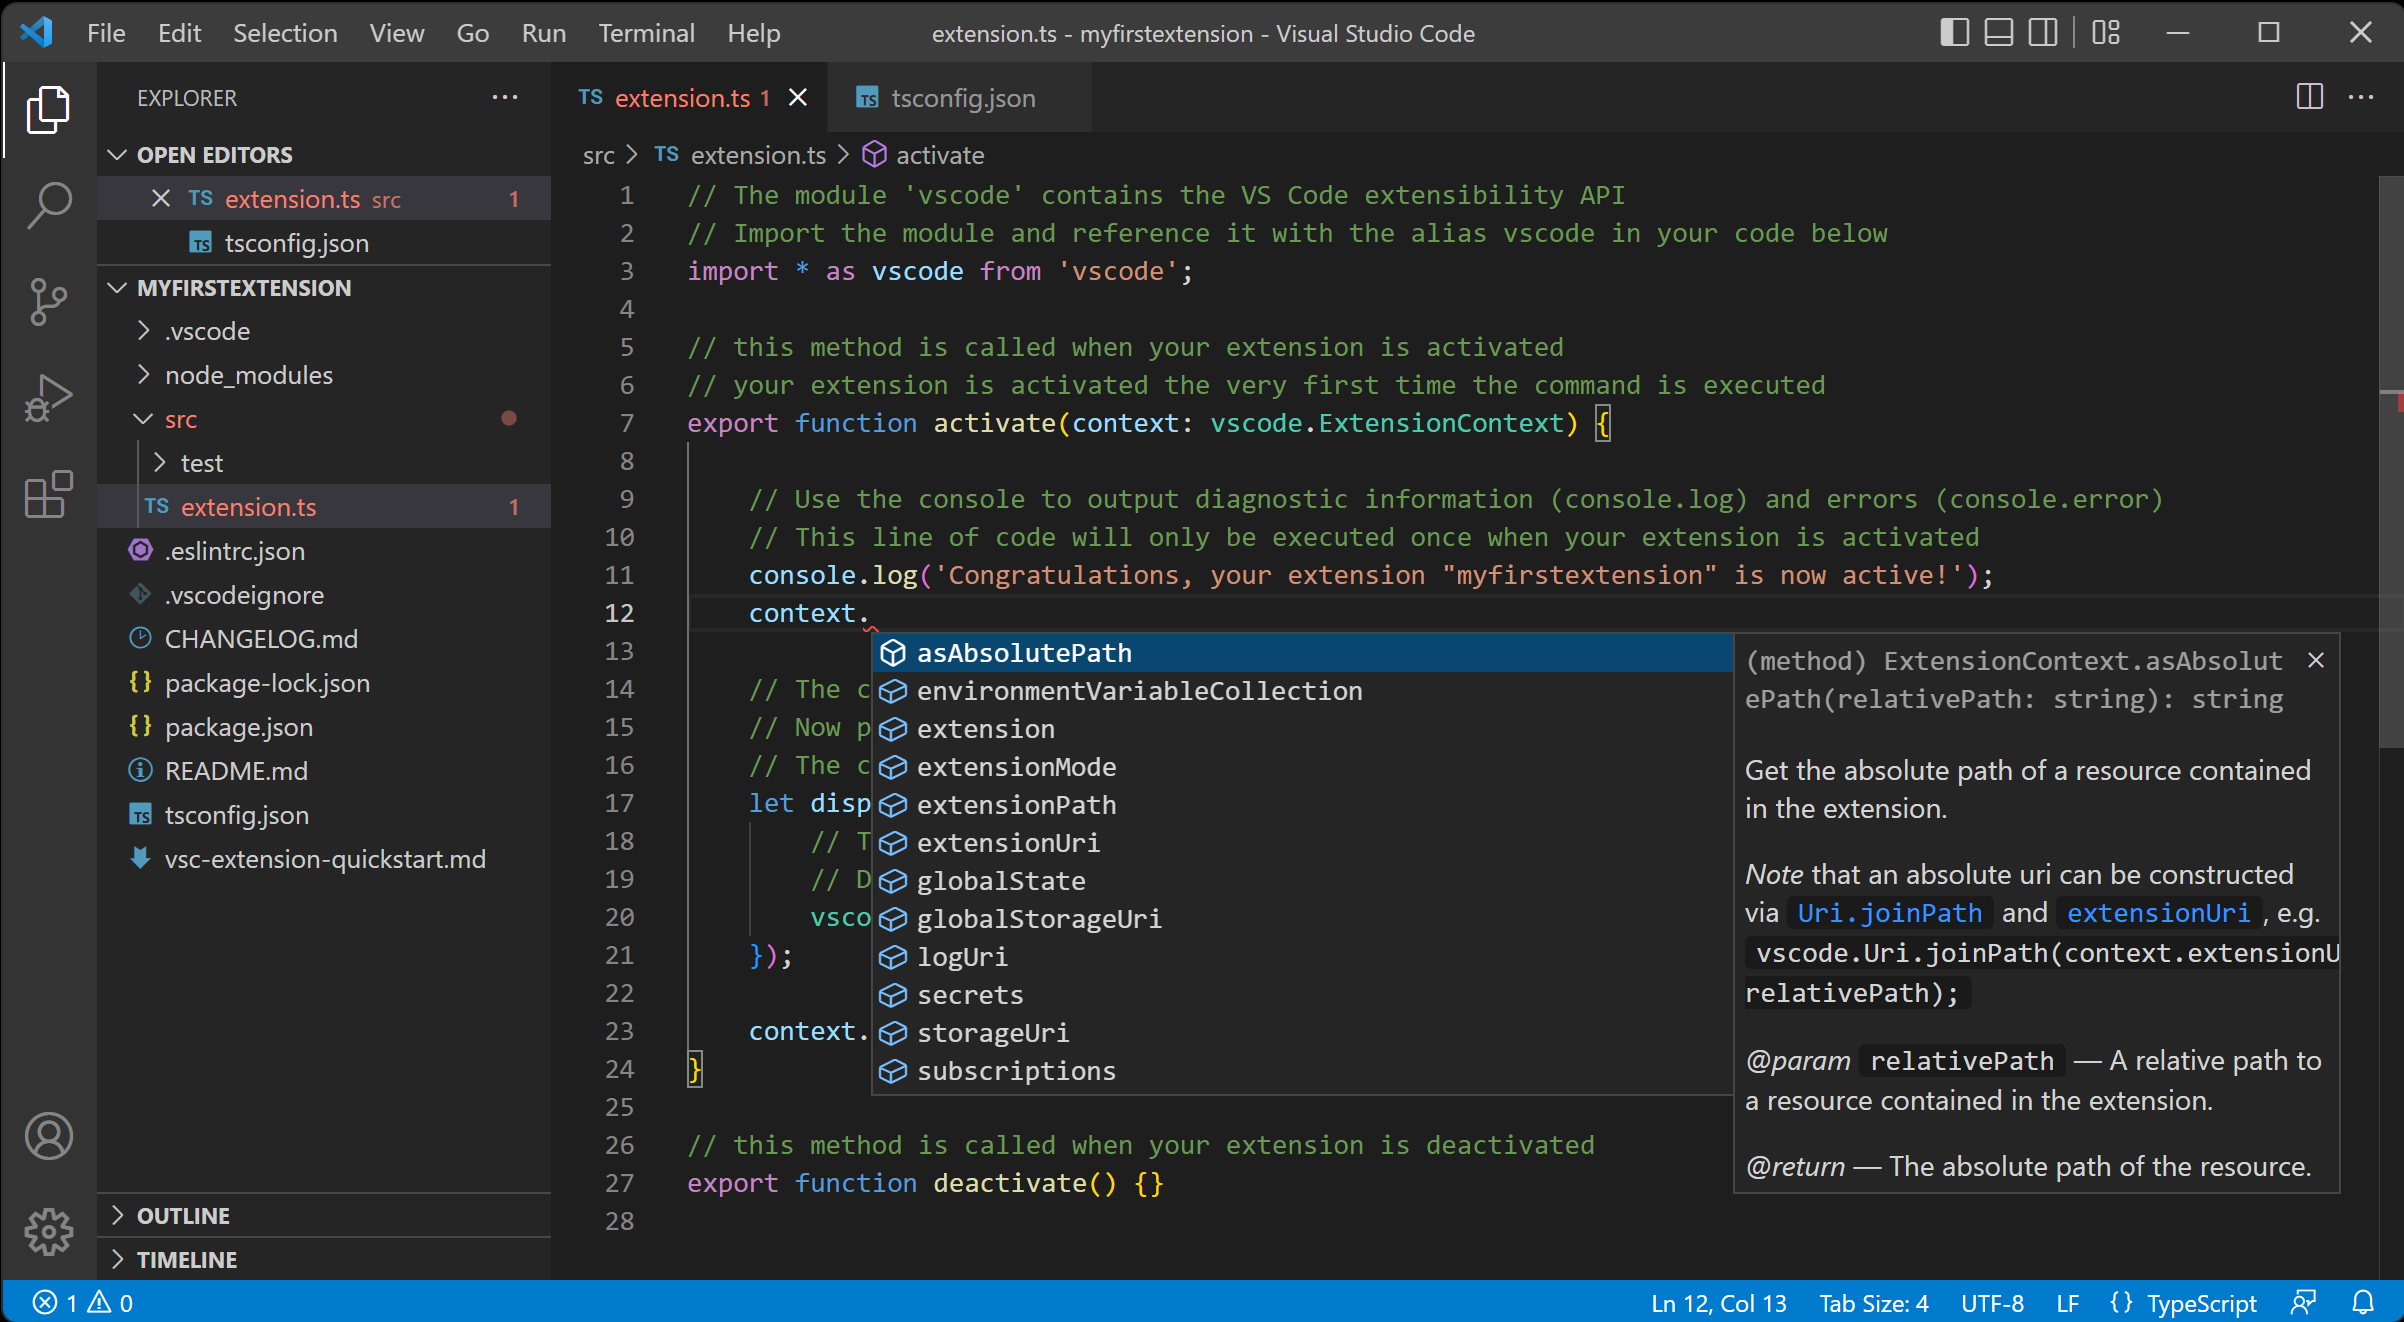 Visual Studio Code is a handy tool created by Microsoft that facilitates TypeScript programming. 